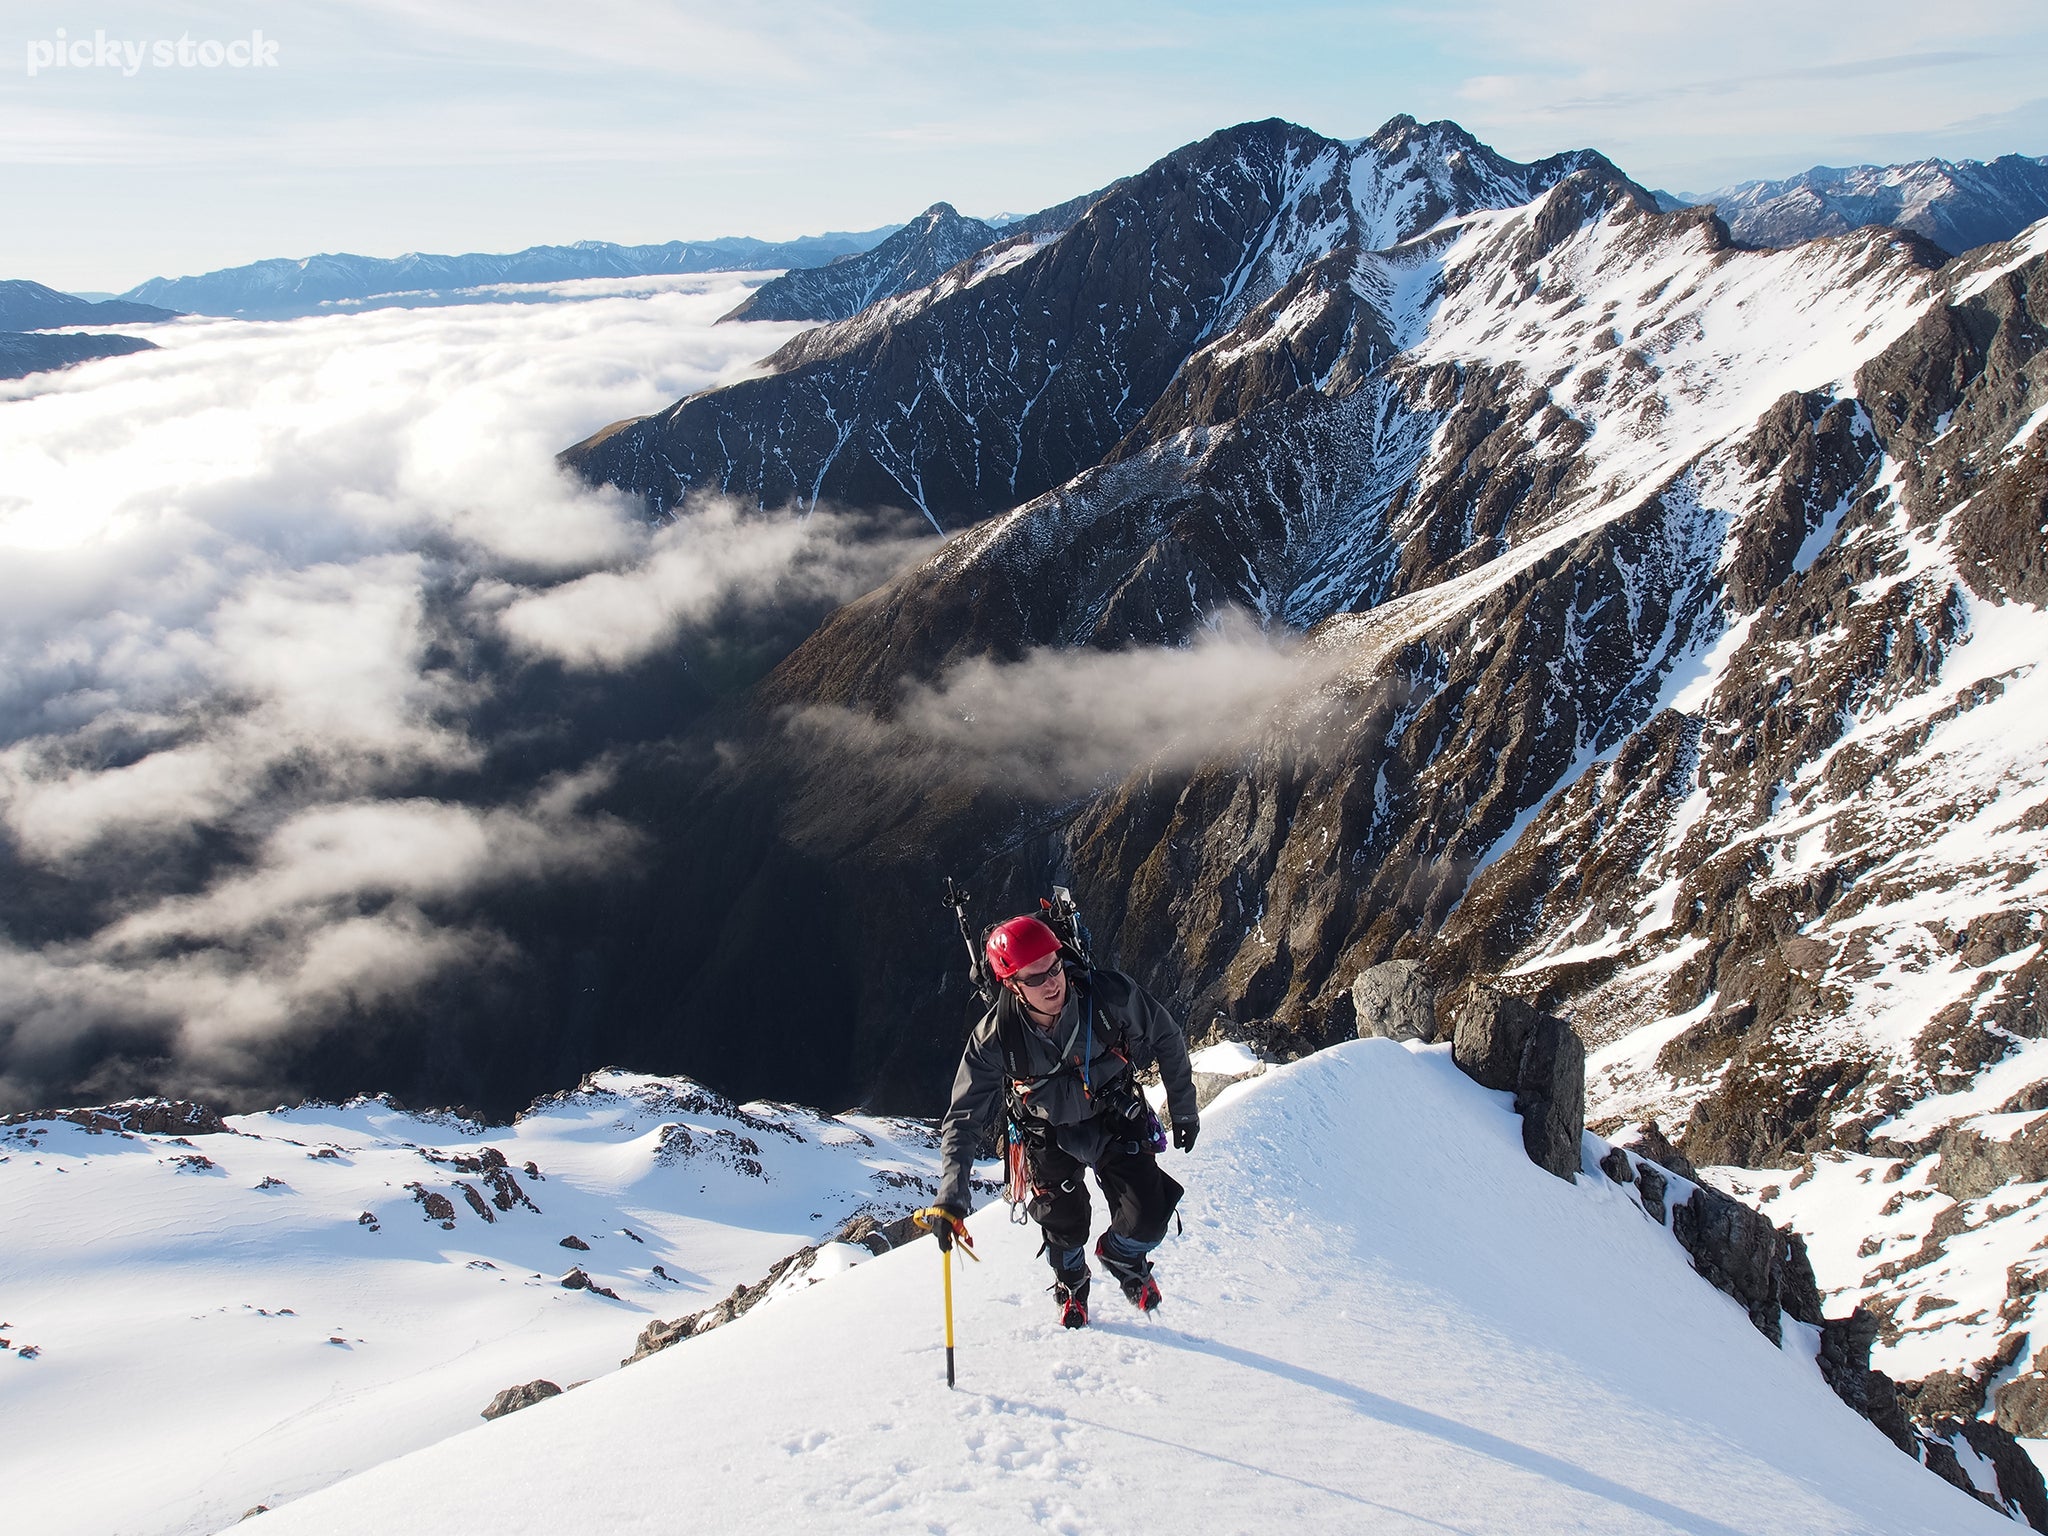 Landscape of man climbing a snow-capped mountain higher than the clouds. the climber advances the trail with a yellow walking stick. The background reveals an endless valley of peaks.